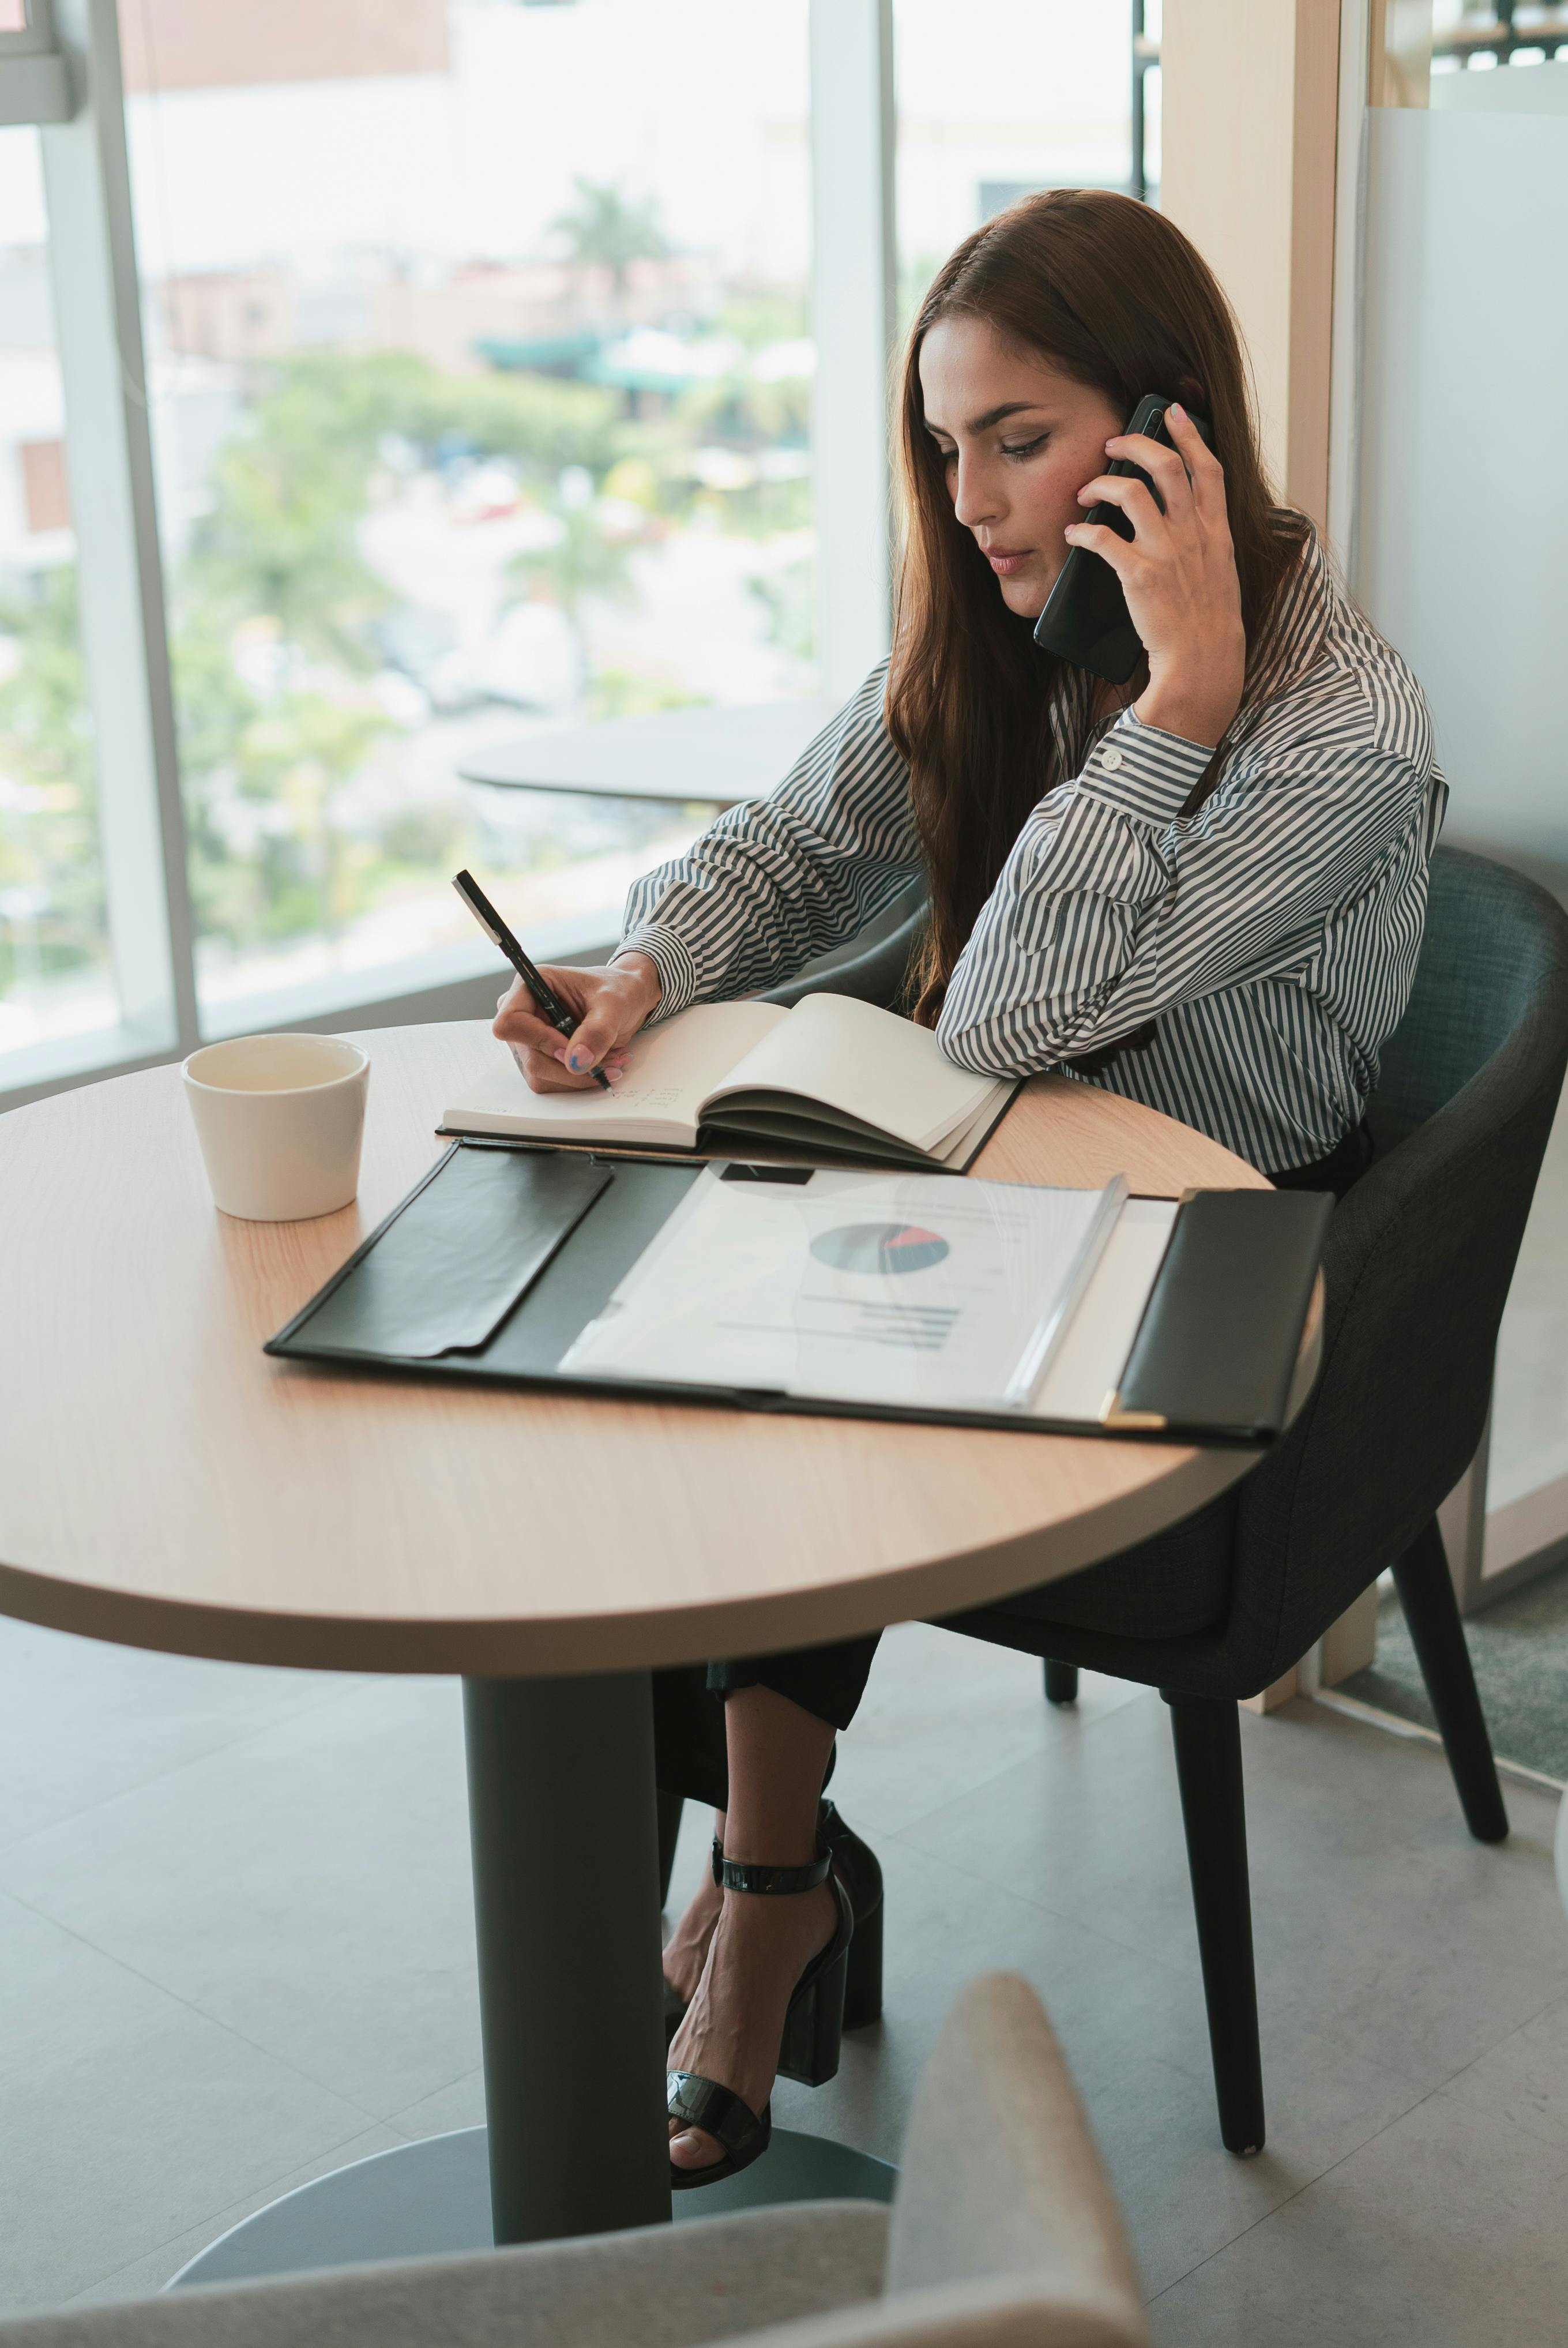 A woman writing something down while on a phone call | Source: Pexels